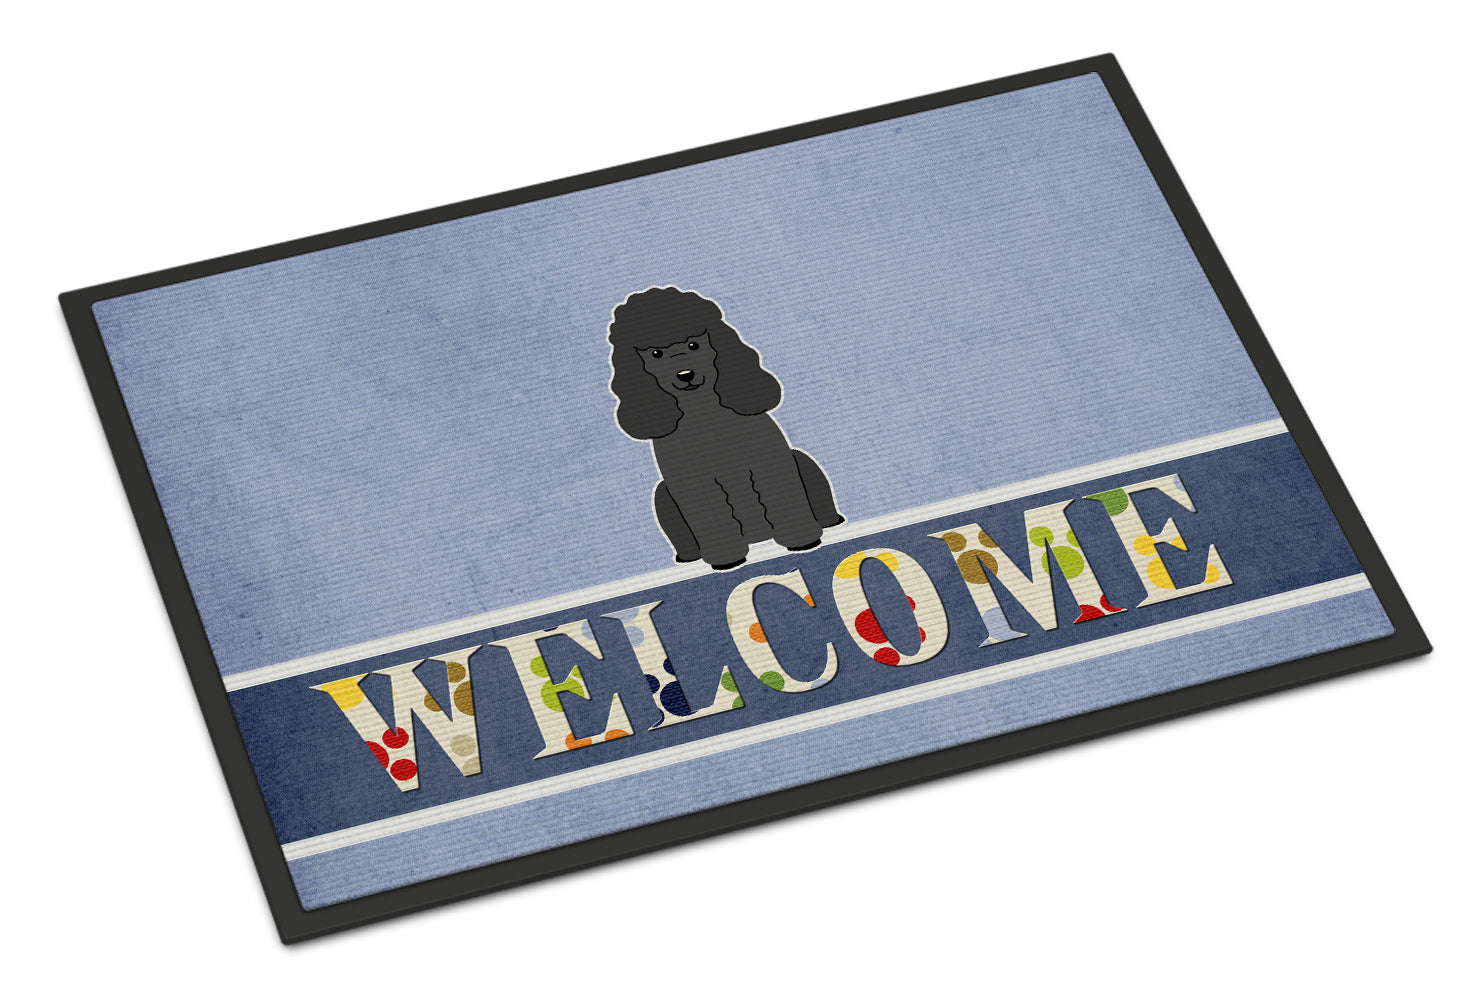 Poodle Black Welcome Indoor or Outdoor Mat 18x27 BB5652MAT - the-store.com